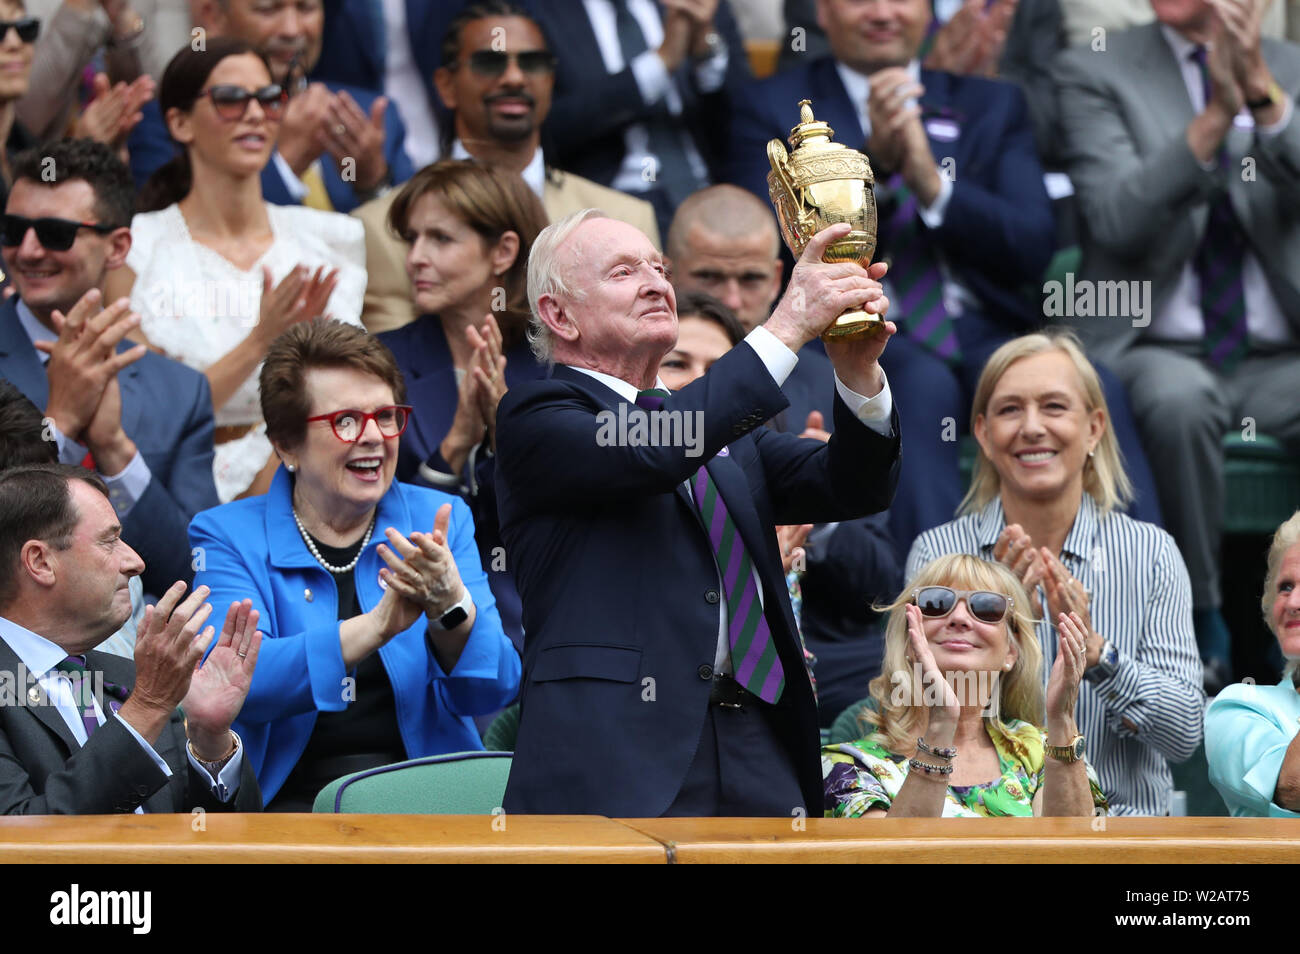 London, UK. 06th July, 2019. Rod Laver in the Royal box with Billie-Jean  King and Martina Navratilova behind him in The Royal Box on Centre Court on  Day Six at The Wimbledon